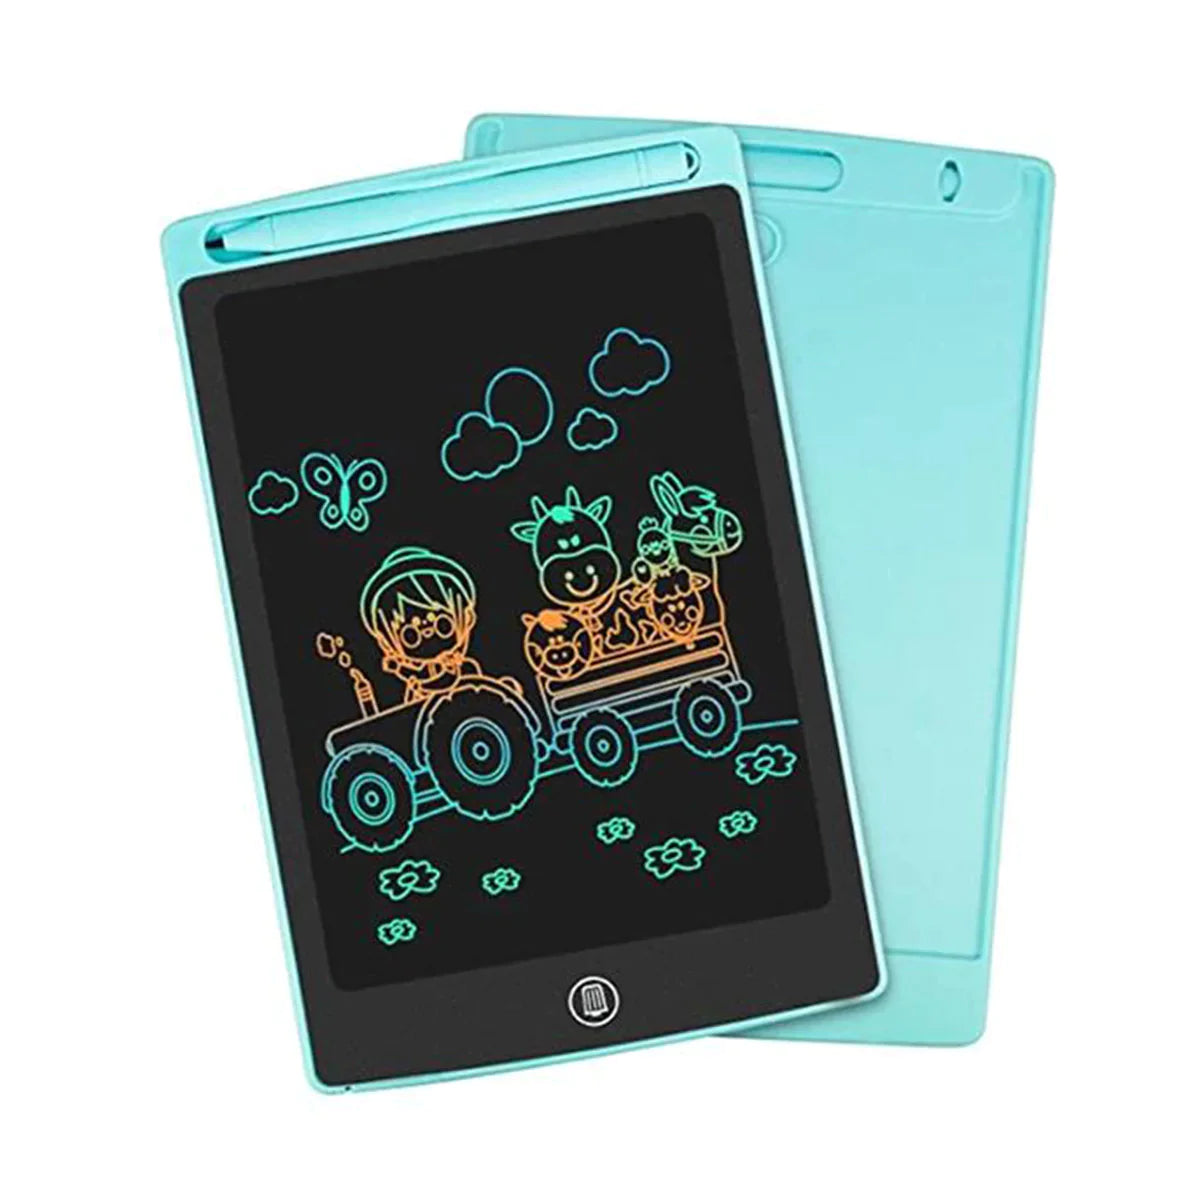 LCD Writing Tablet | Electronic Writing Drawing Pads For Kids